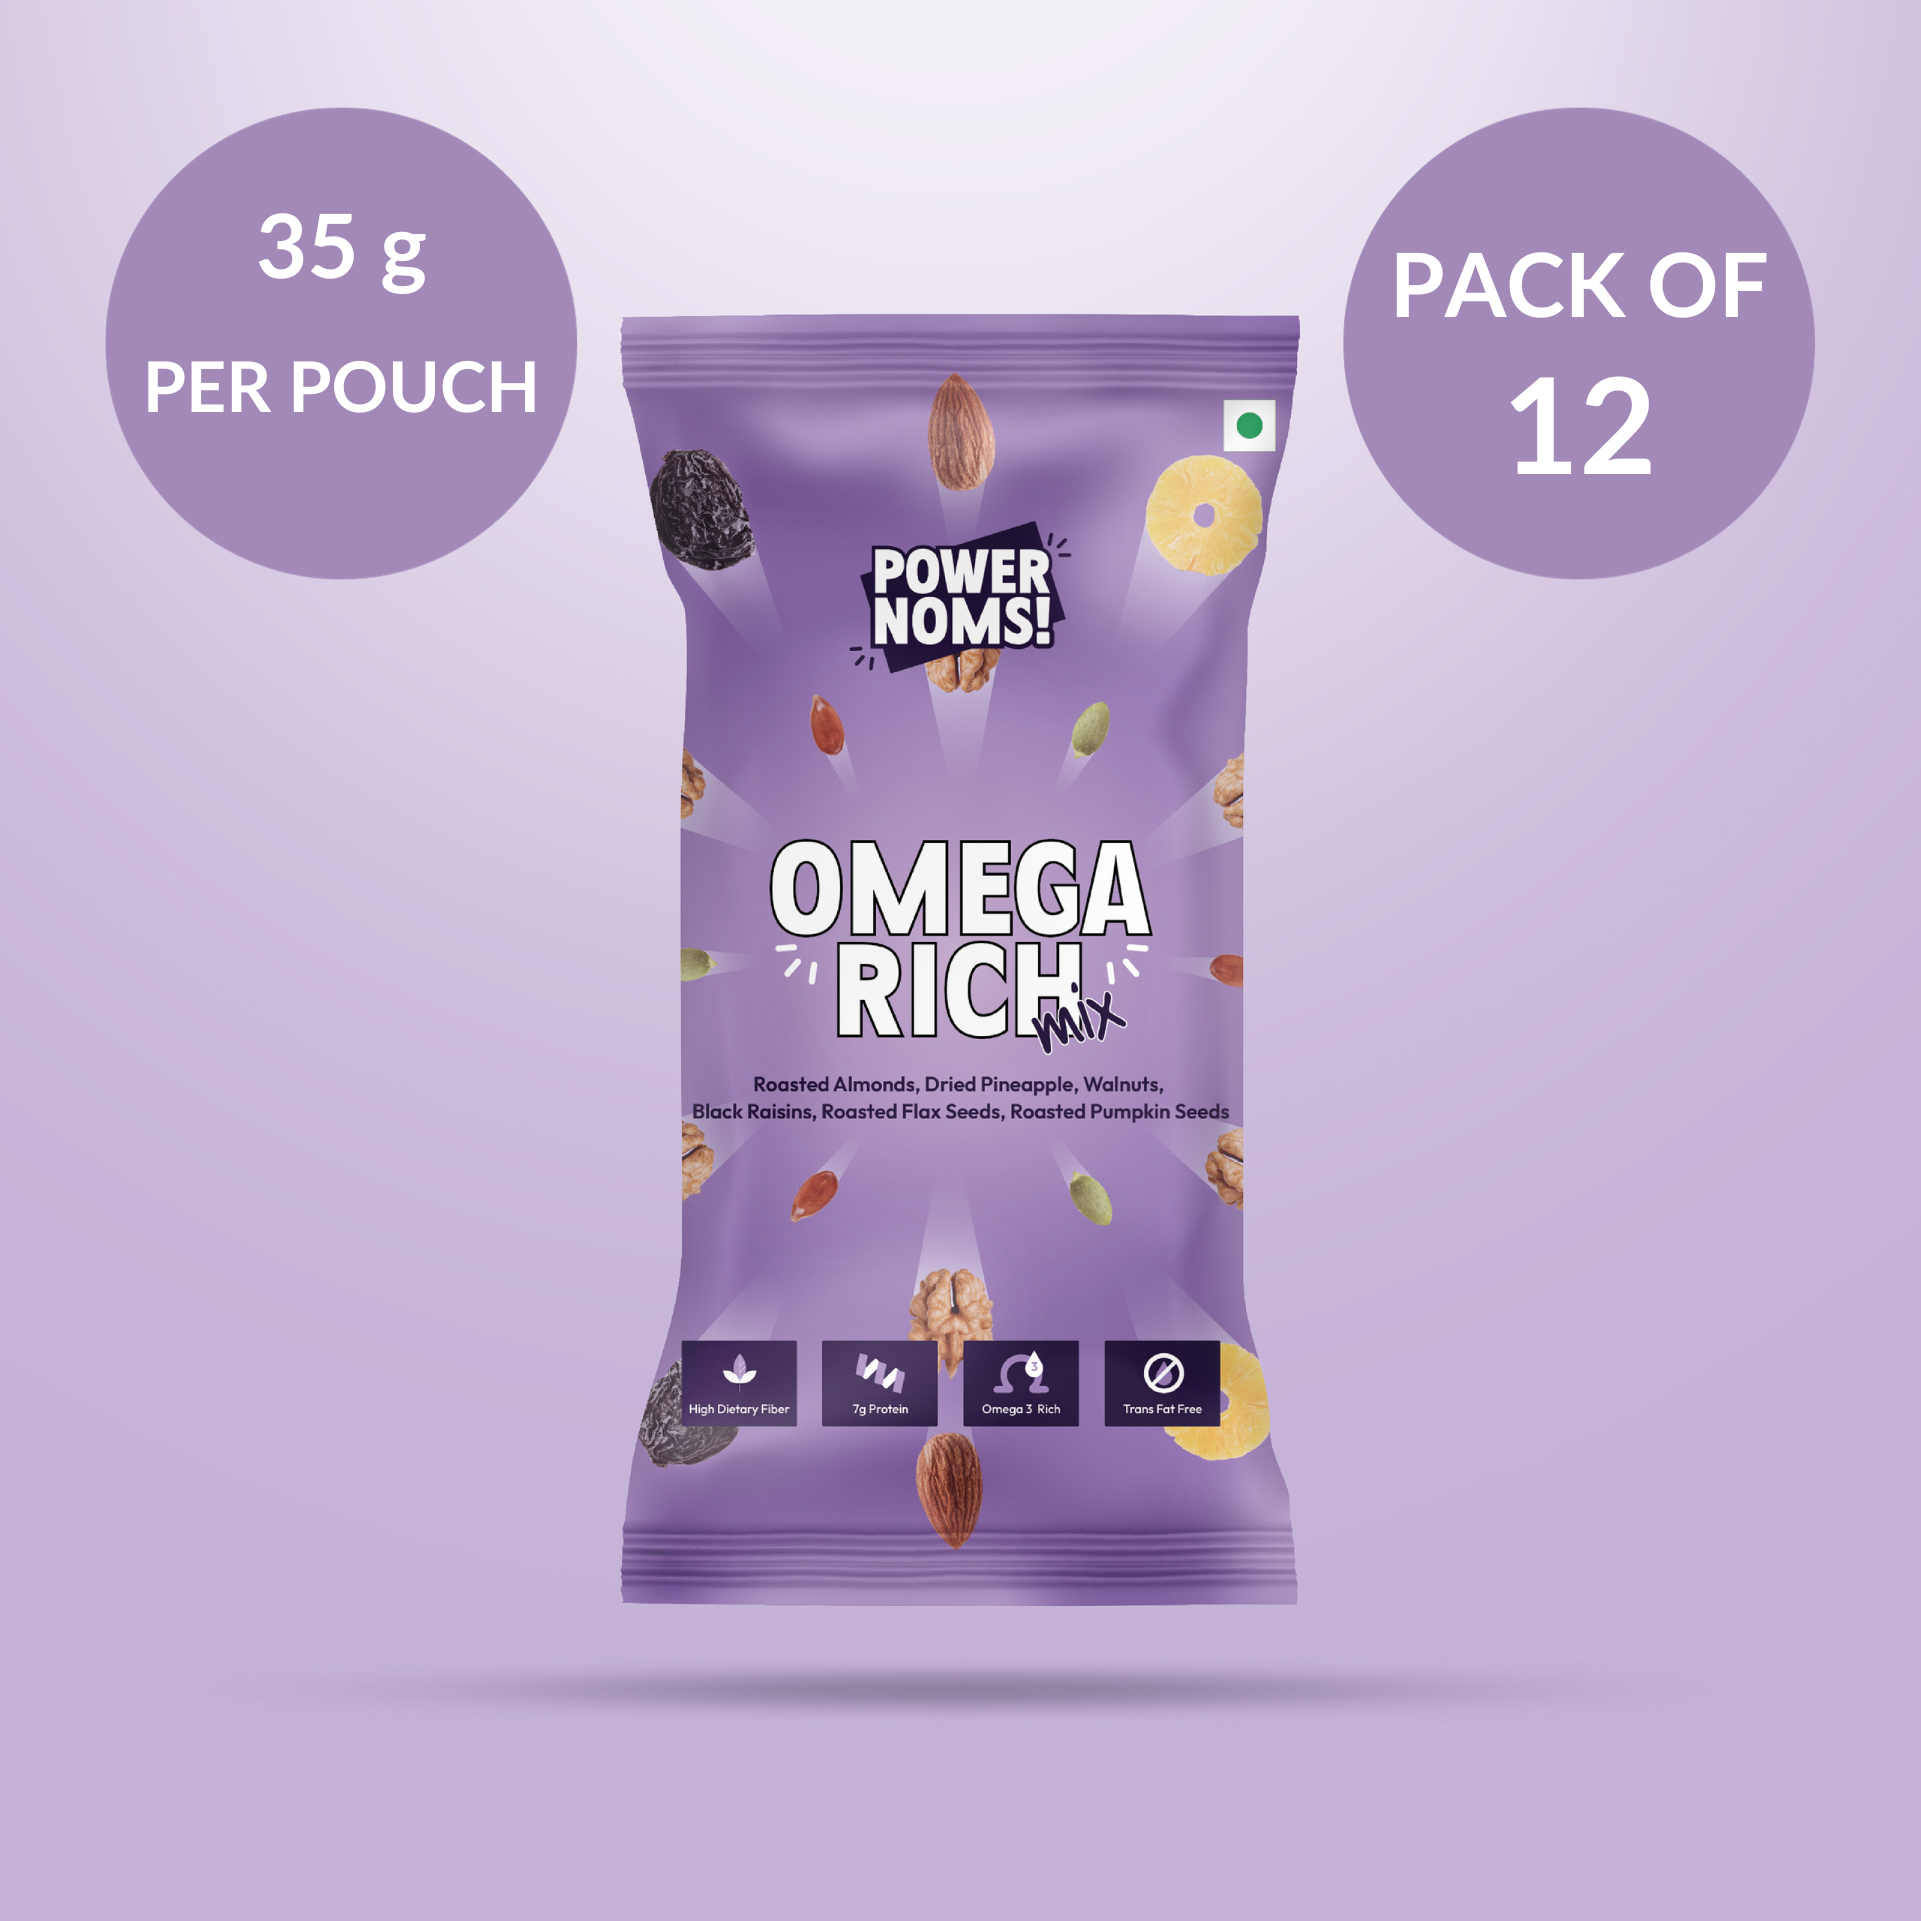 powernoms omega rich mix pack of 12